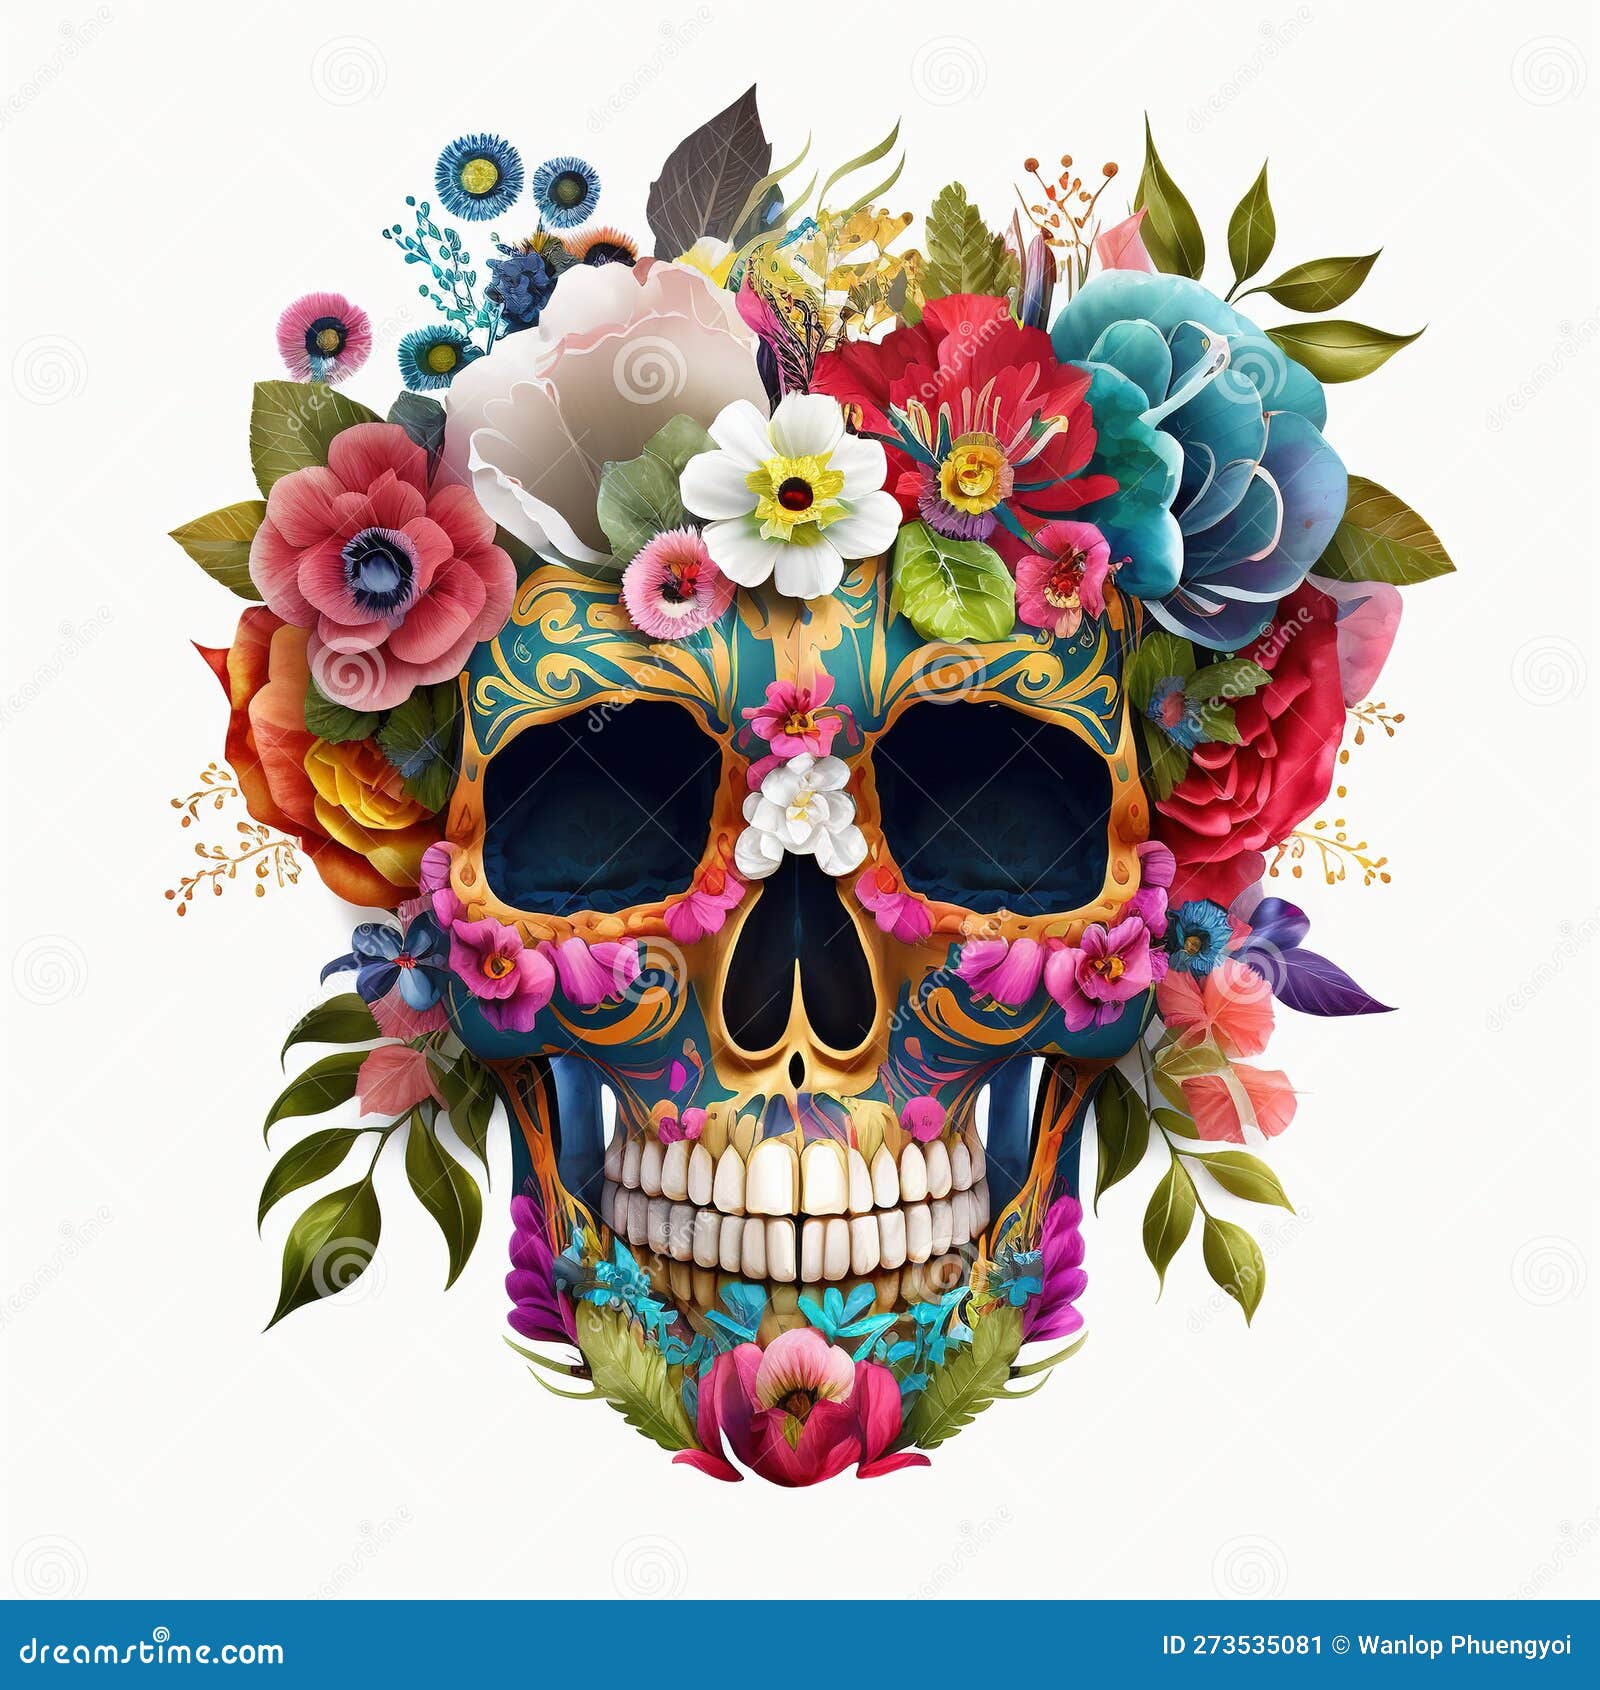 https://thumbs.dreamstime.com/z/floral-cinco-de-mayo-skull-stock-photos-combines-traditional-mexican-holiday-beauty-colorful-flowers-photos-273535081.jpg